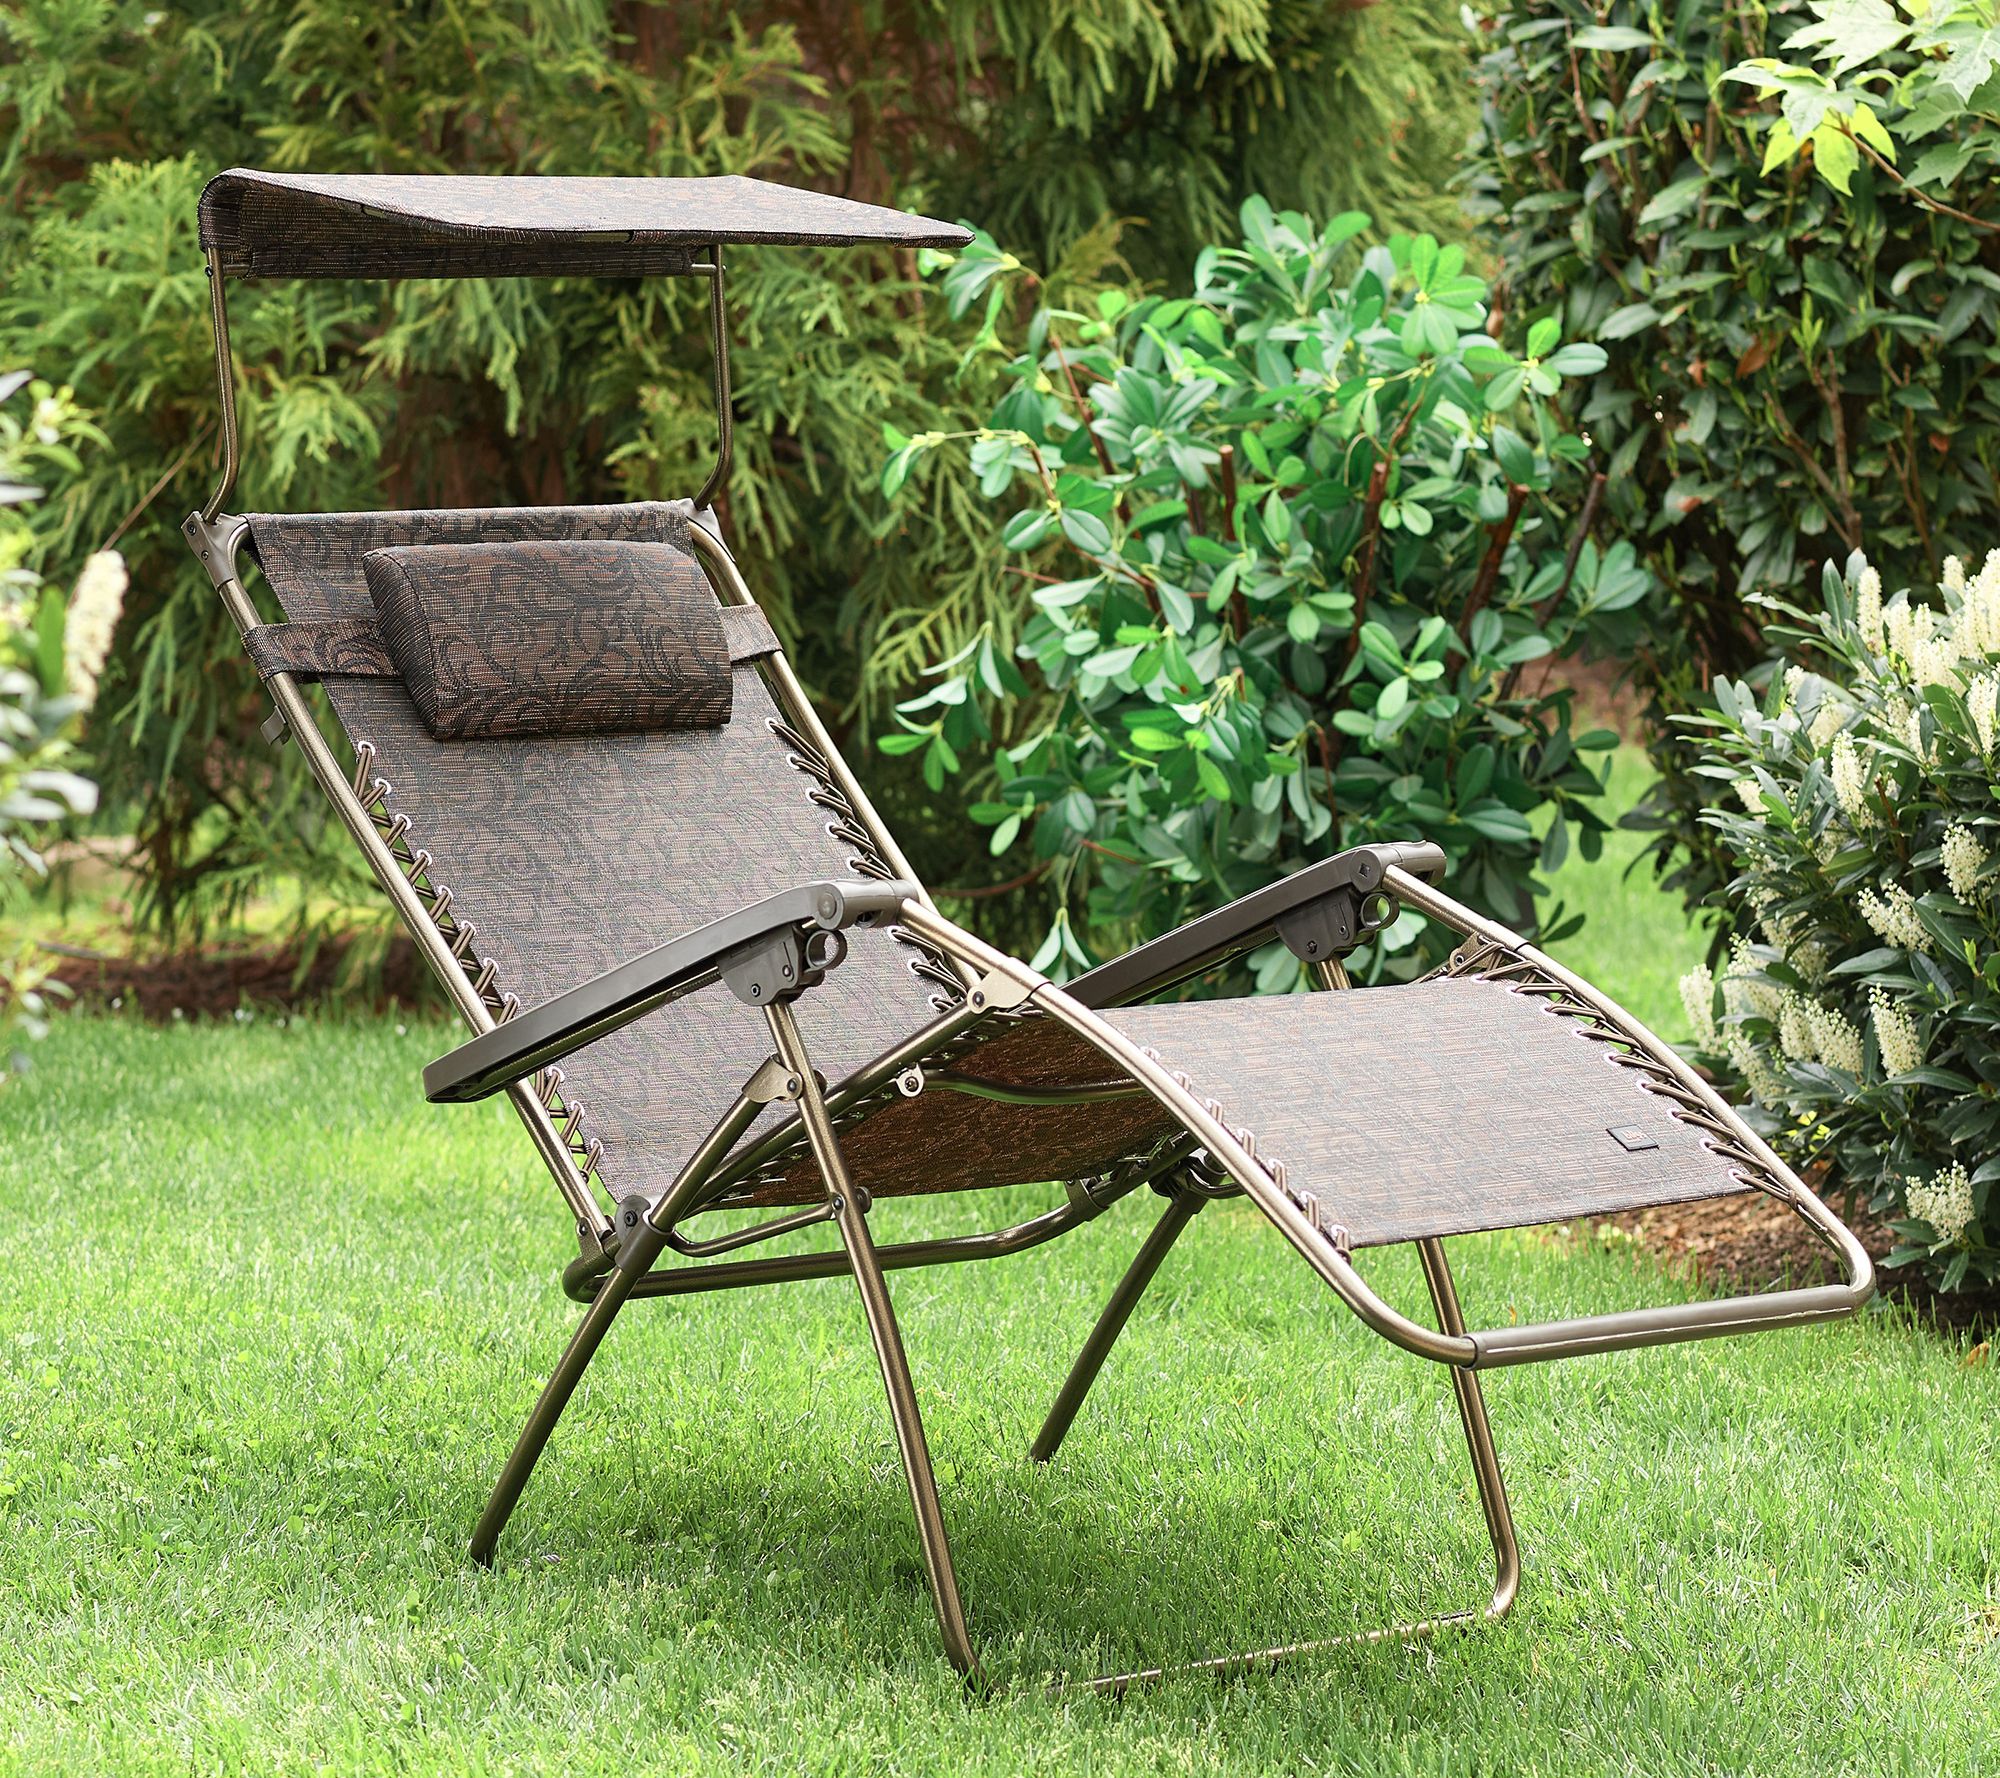 Bliss Hammocks Zero Gravity Chair with Covered Bungee Canopy and Side Tray Blue Floral